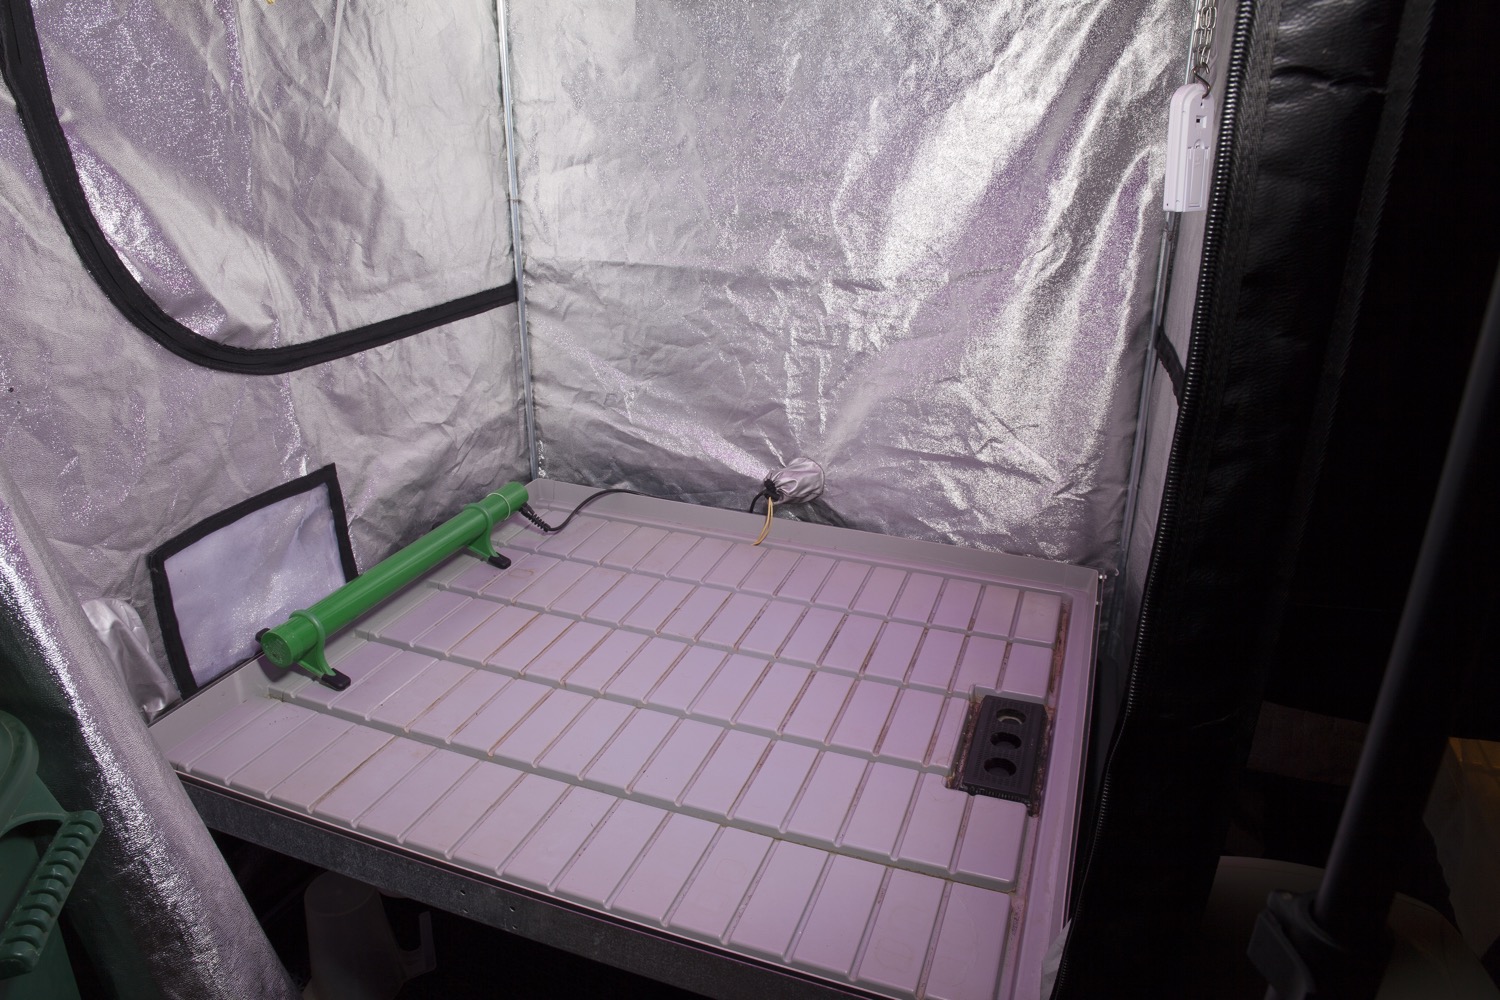 This grow tent is ready to be thoroughly cleaned